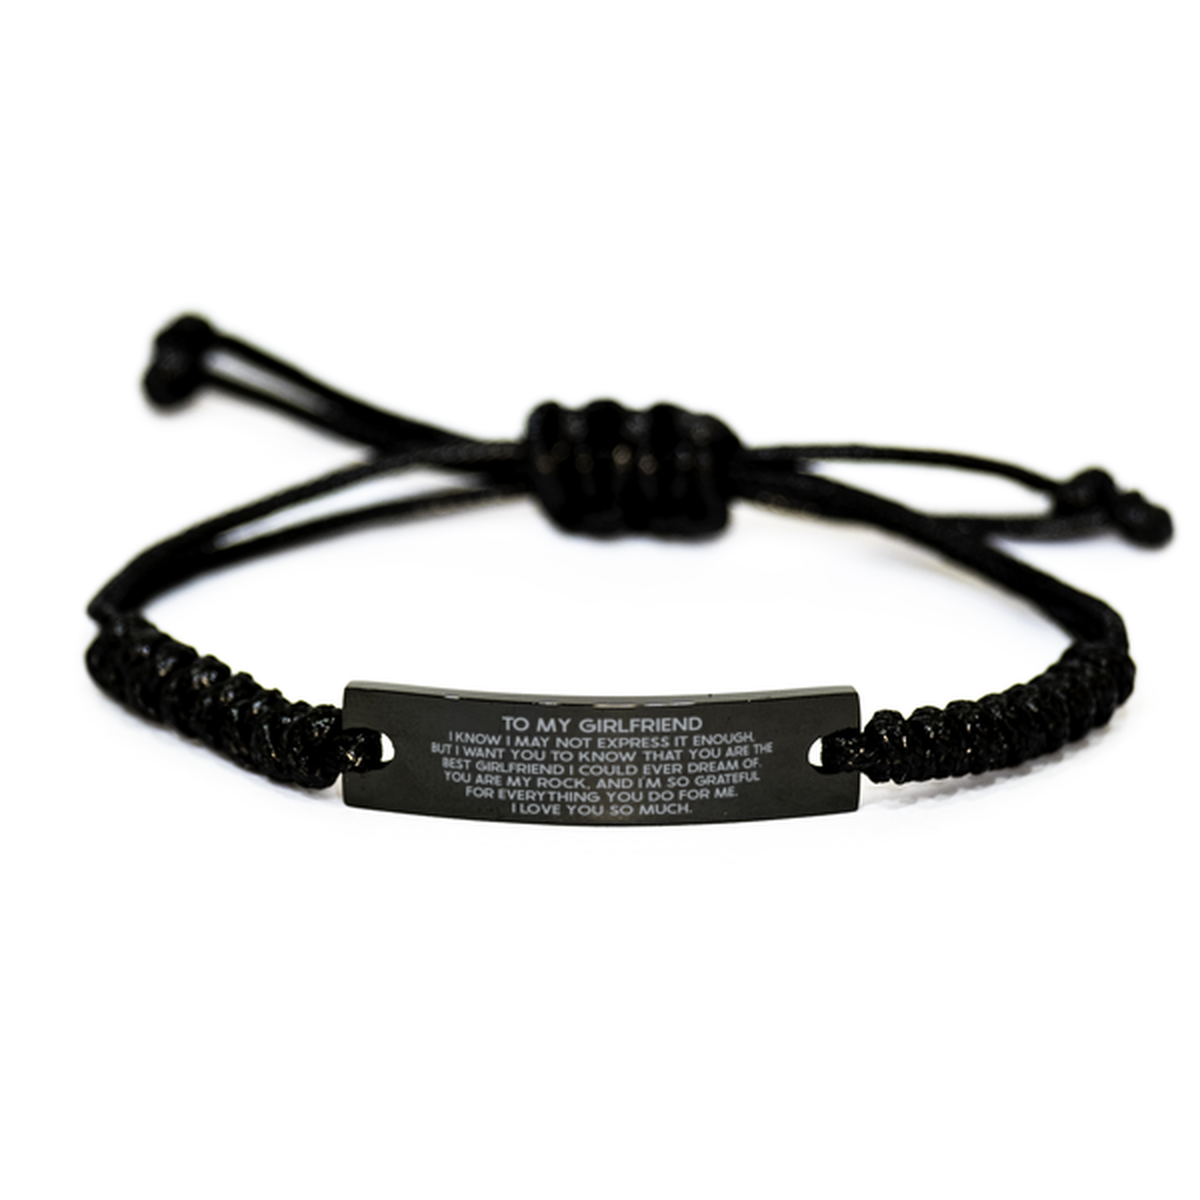 To My Girlfriend Rope Bracelet, You Are My Rock, Birthday Gifts For Girlfriend From Boyfriend, Valentines Gifts For Women